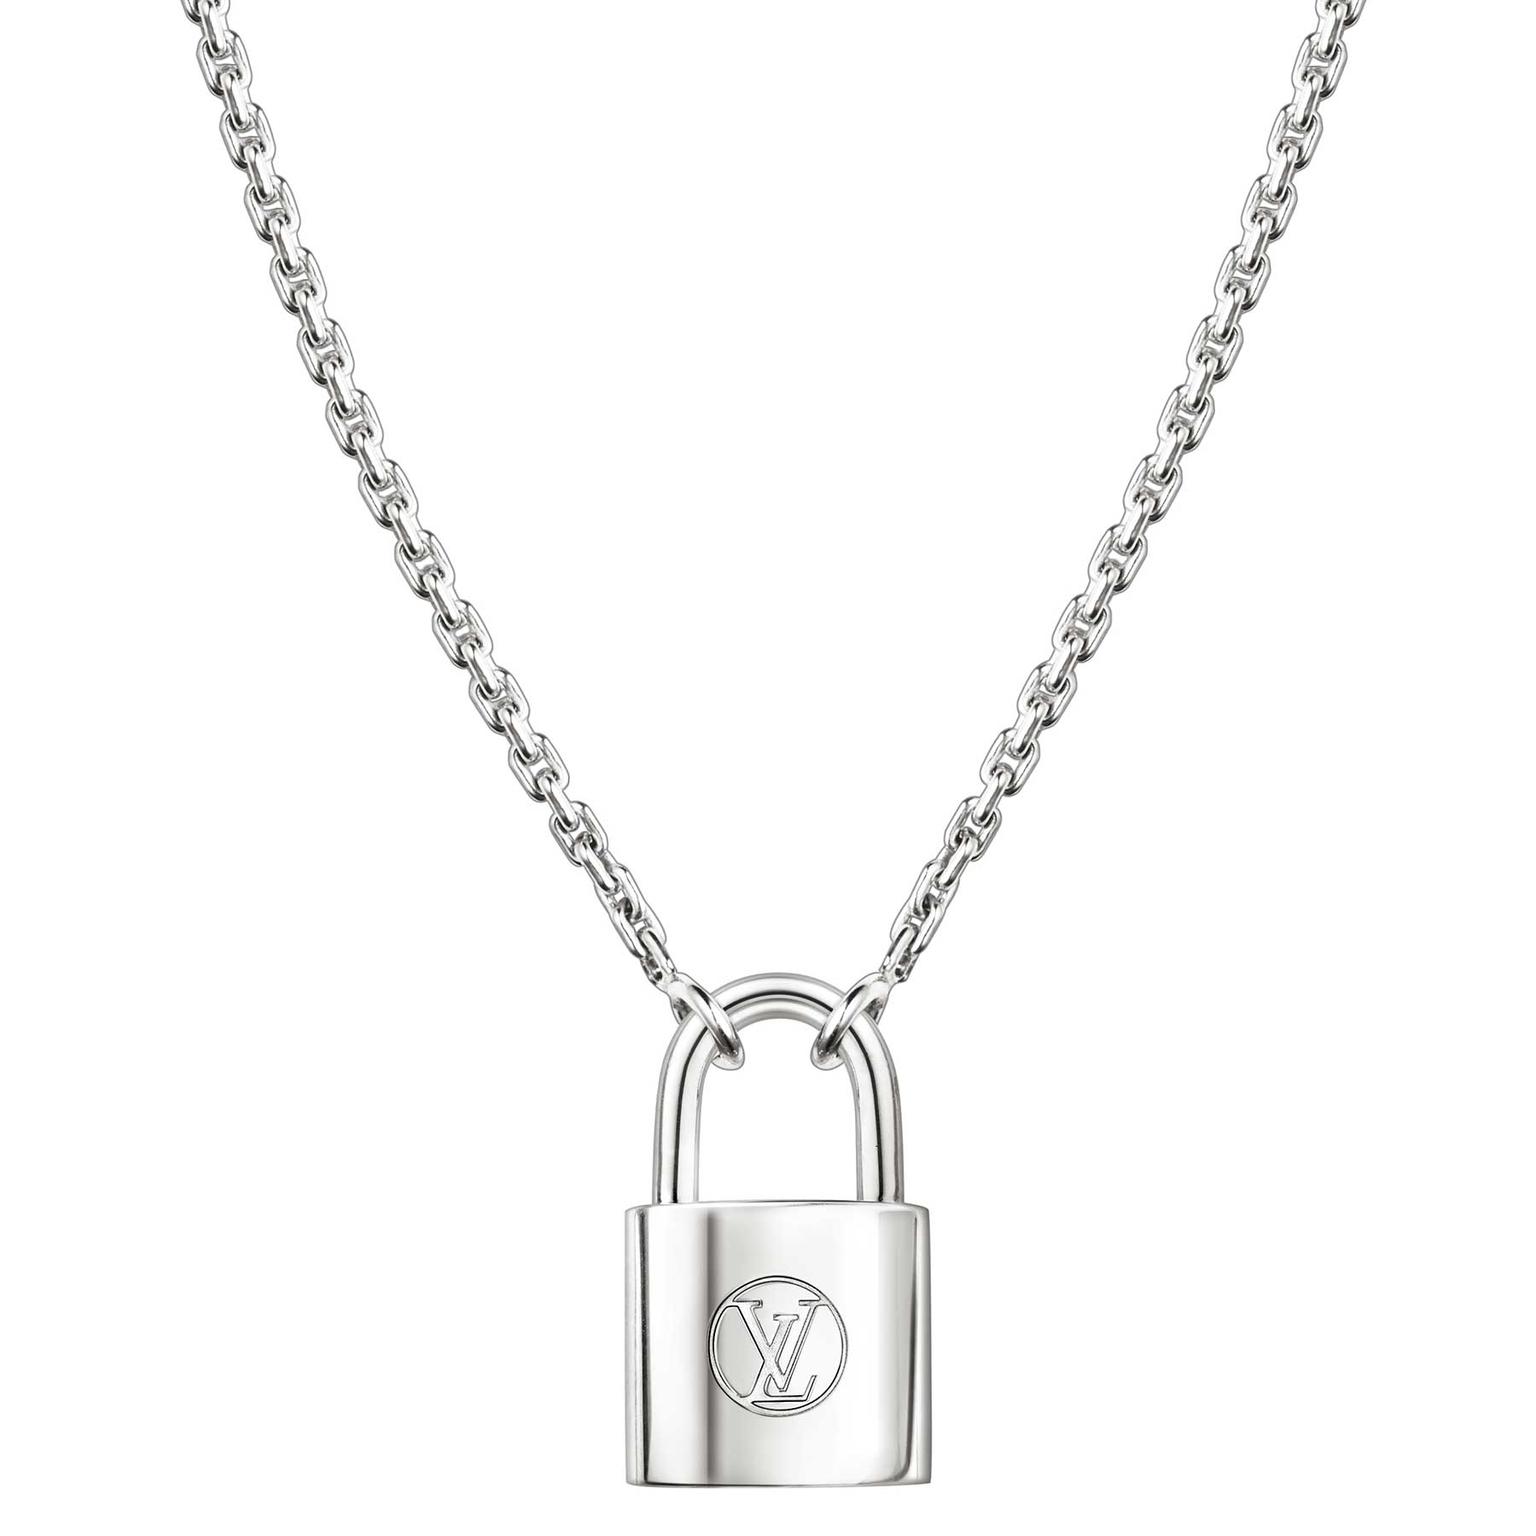 Silver Lockit pendant in sterling silver | Louis Vuitton | The Jewellery Editor